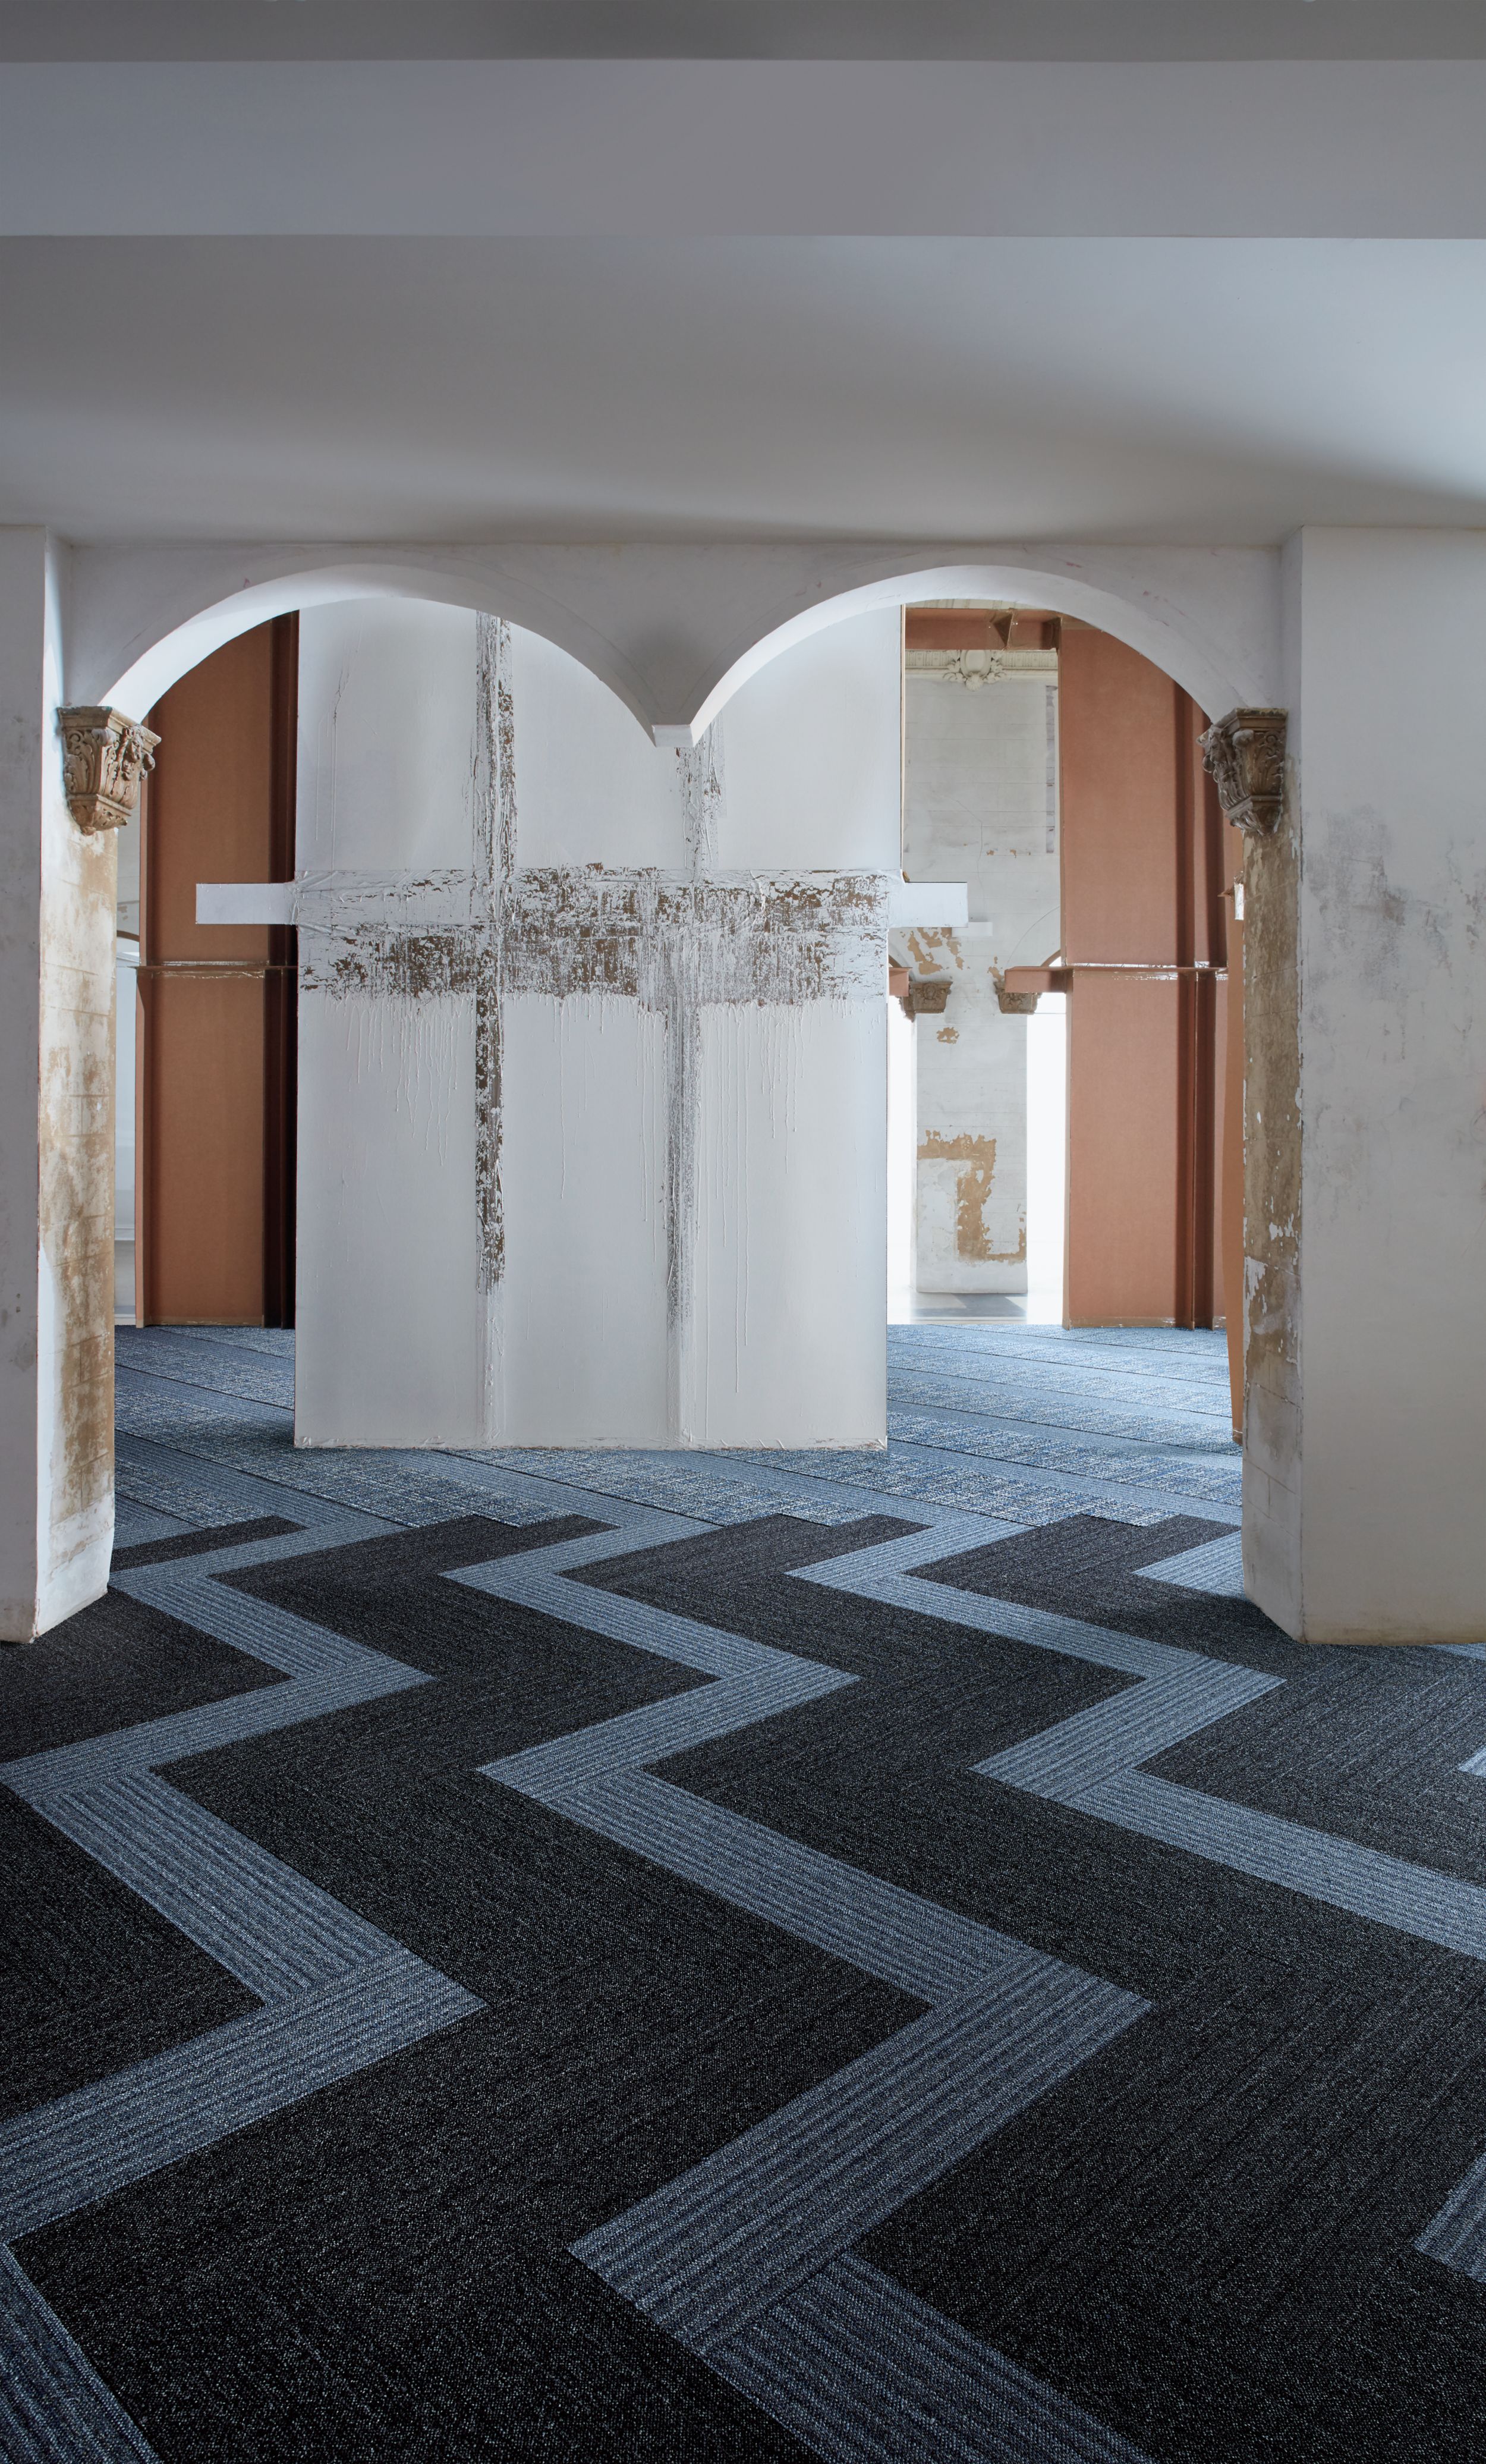 Interface WW865 and WW895 plank carpet tile in lobby setting with archway numéro d’image 10